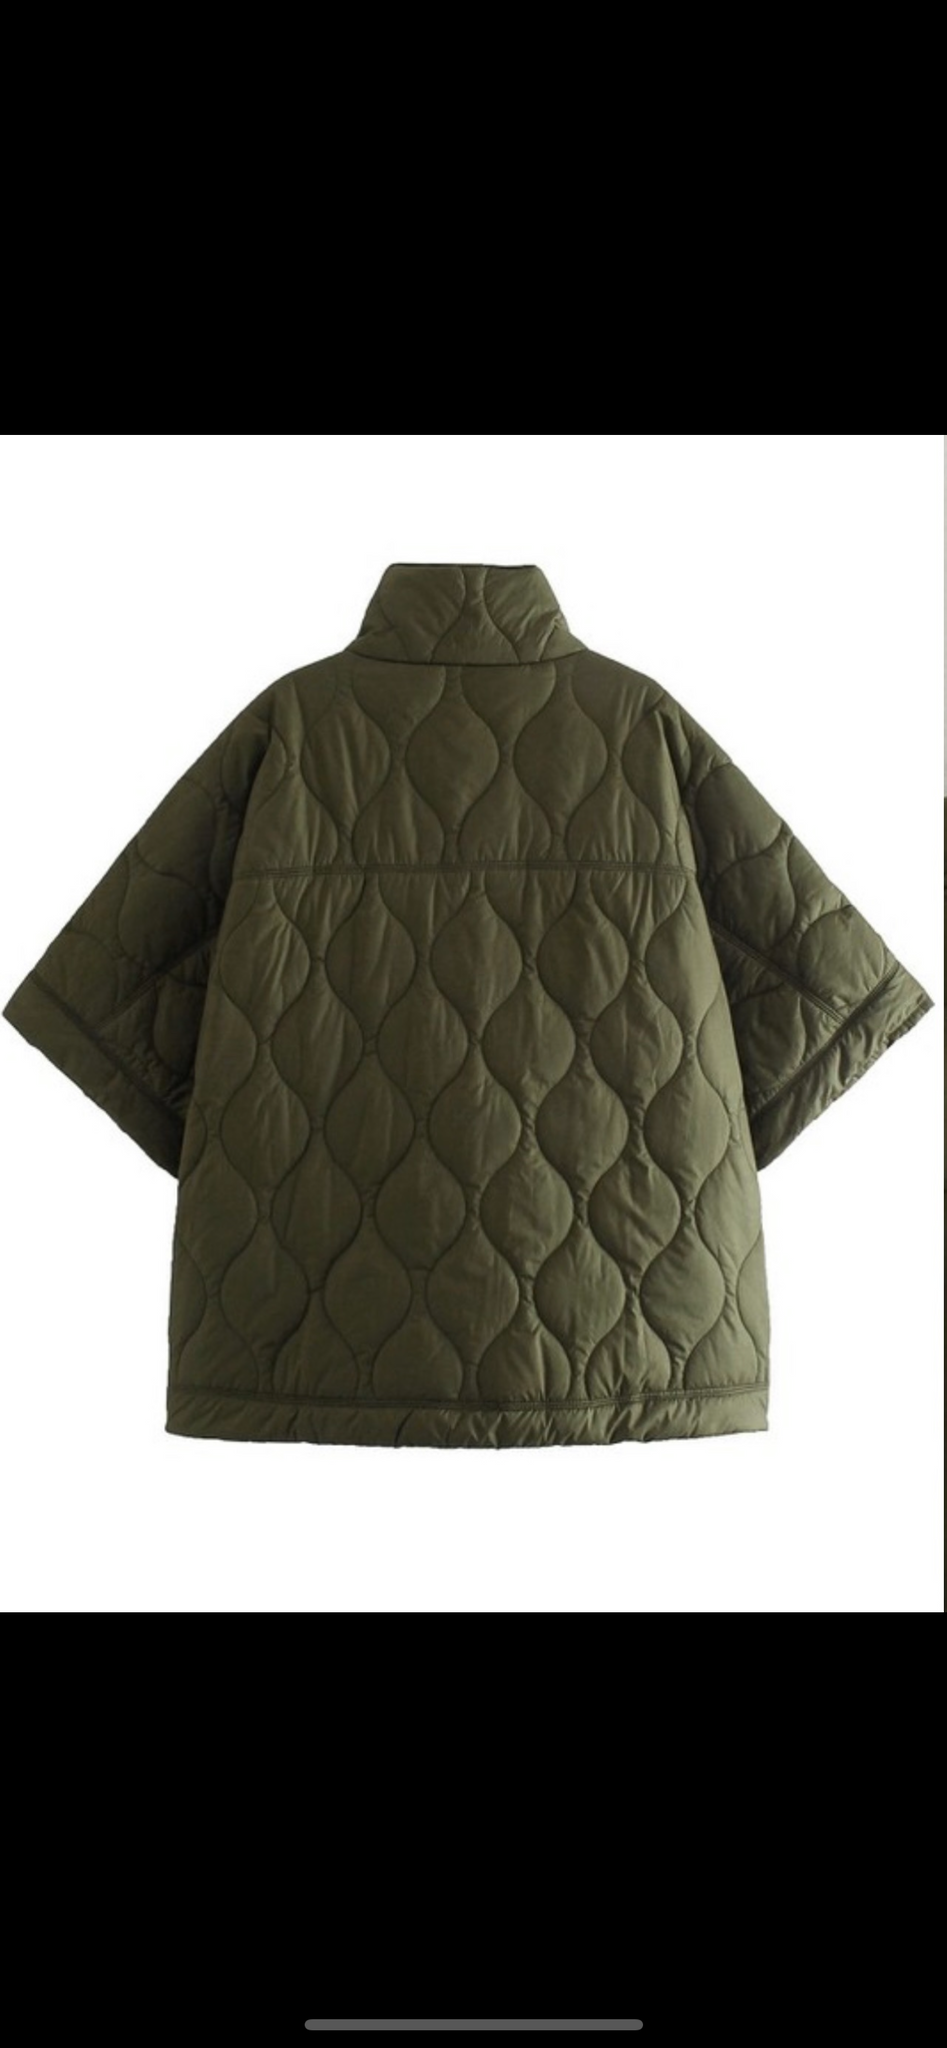 CAPE JACKET (Quilted)